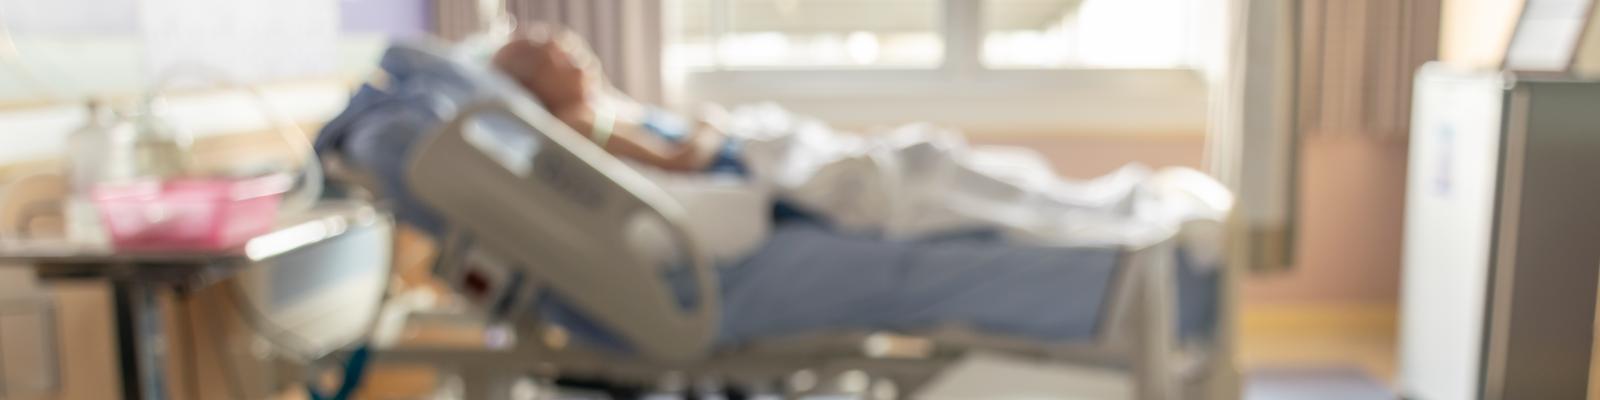 Blurred photo of patient in hospital bed